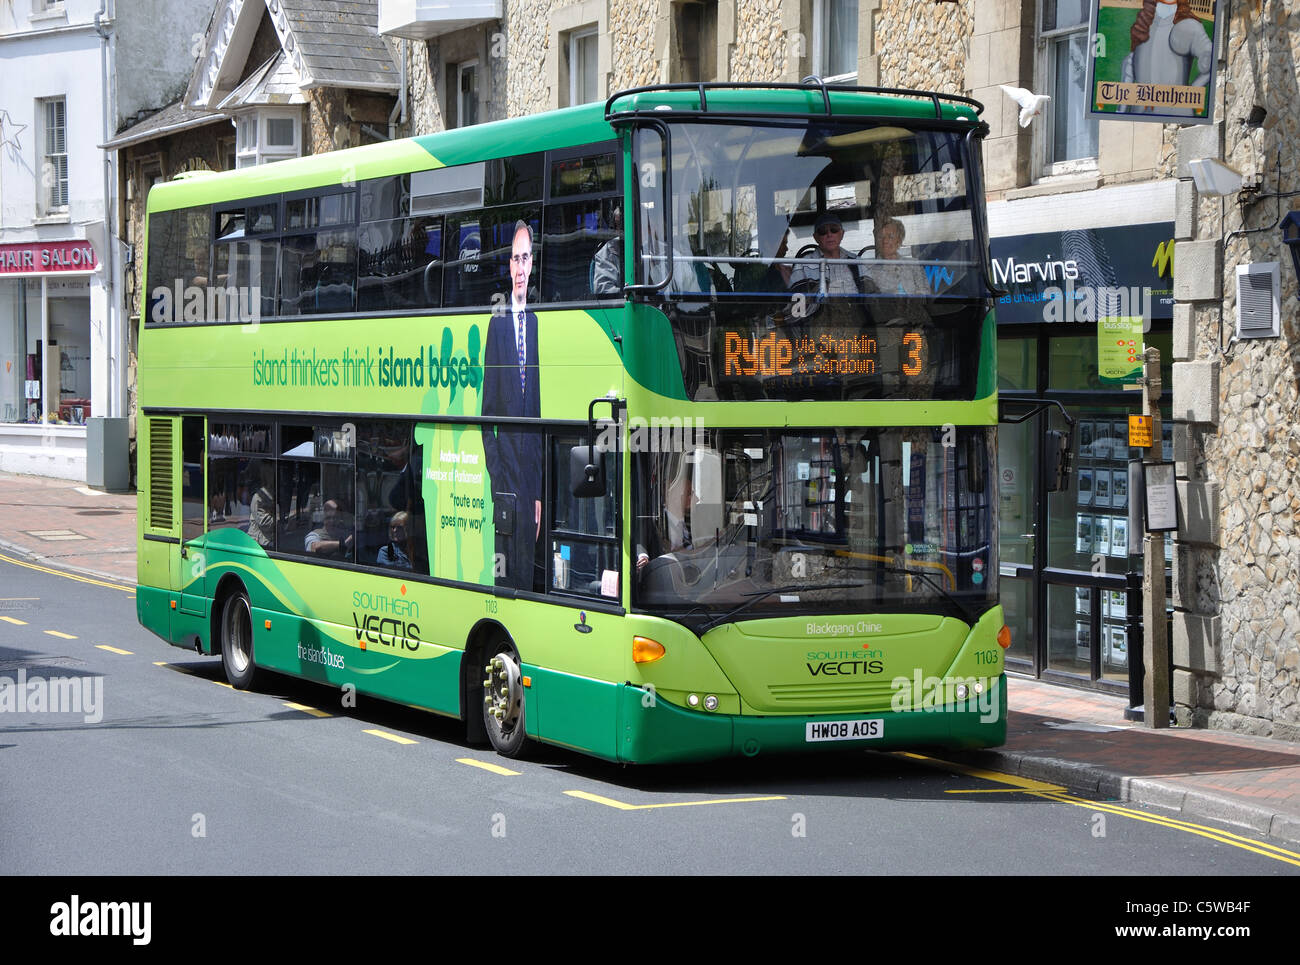 Southern Vectis, double decker bus, Ventnor, Isle of Wight, England, UK Stock Photo